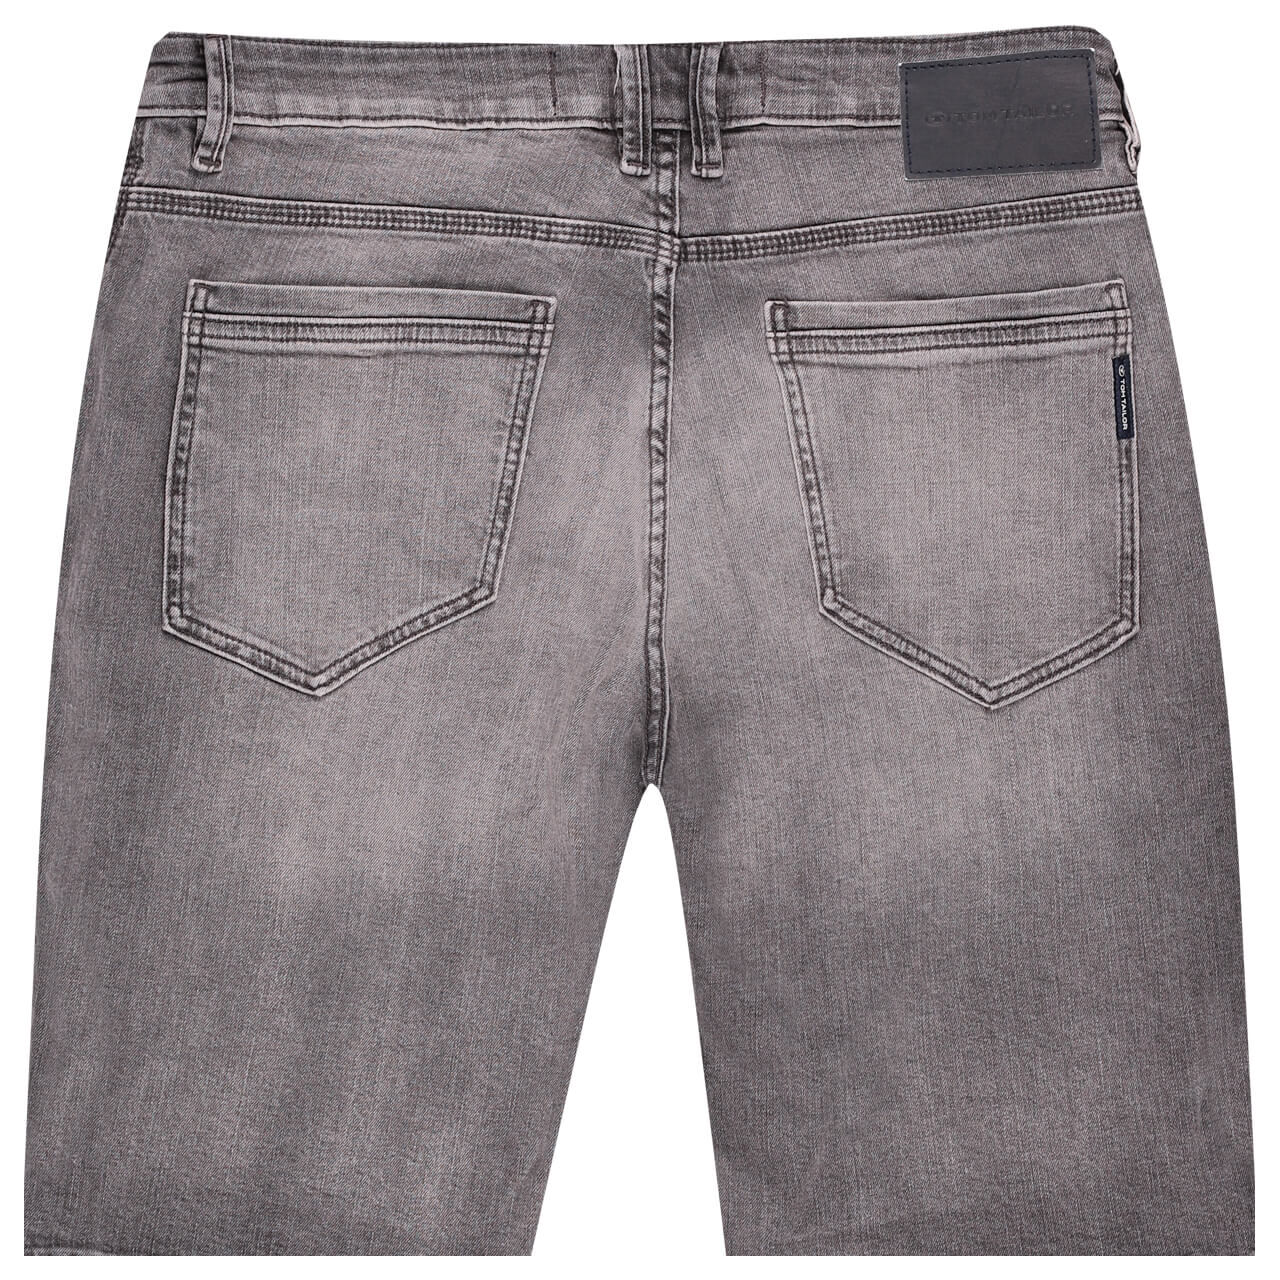 Tom Tailor Jeans Josh Shorts clean used mid stone grey